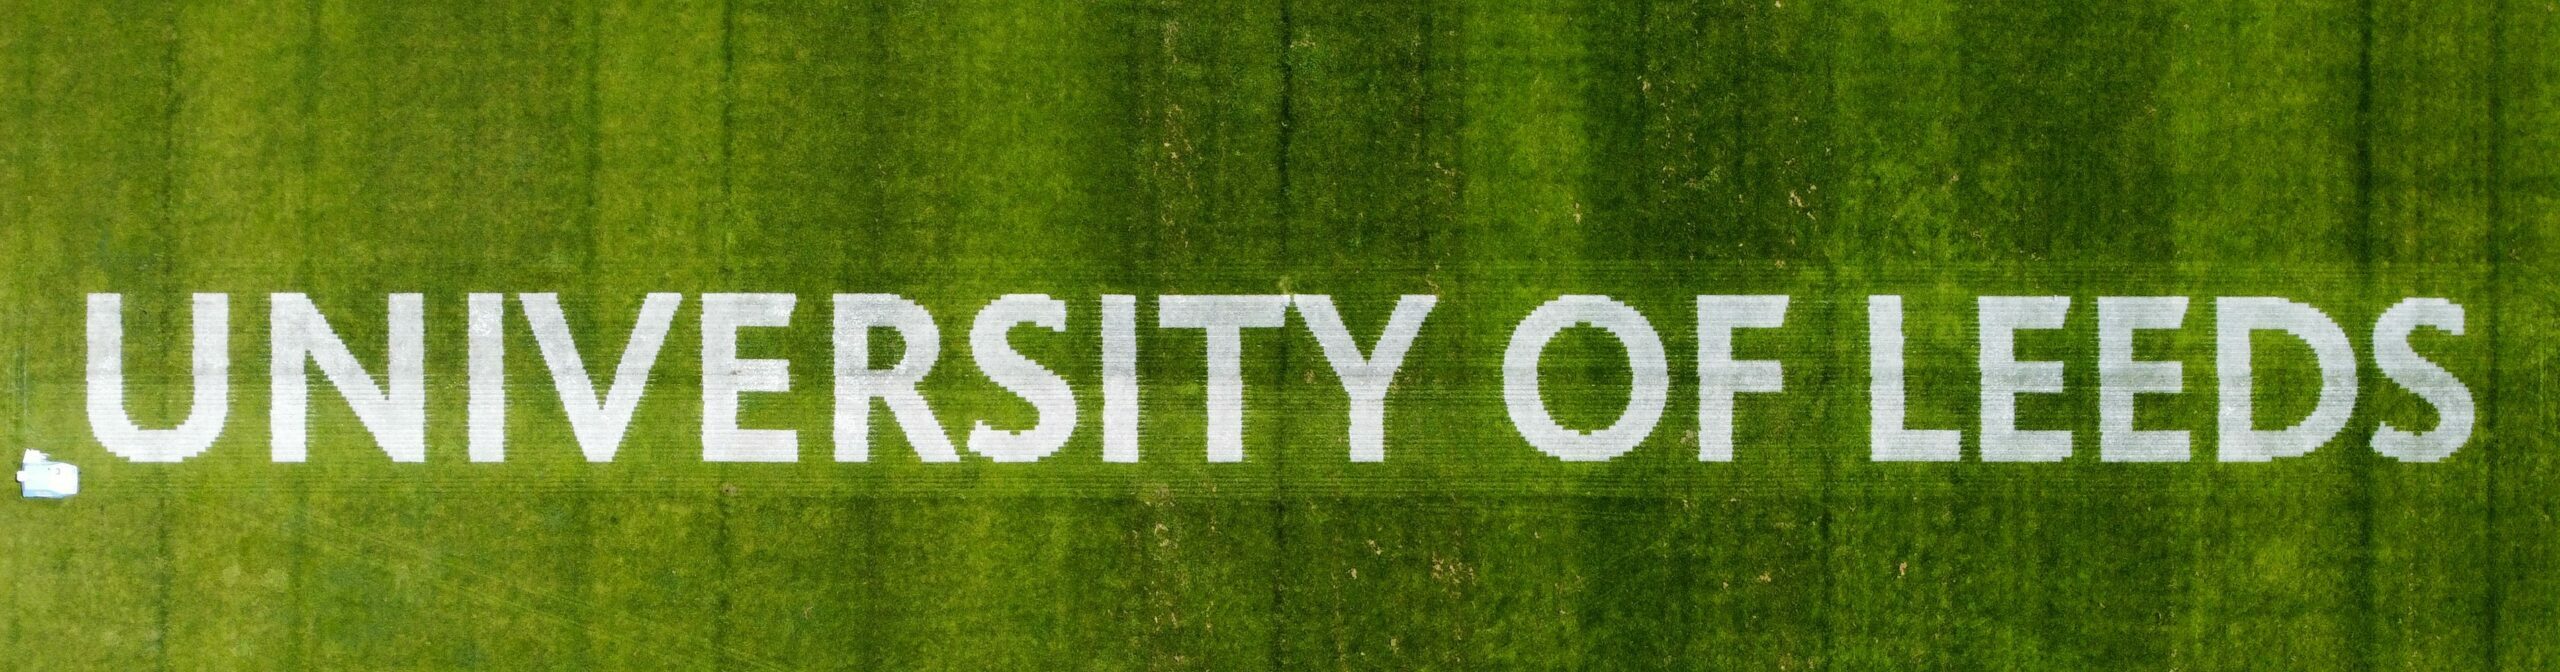 University of leeds text painted on grass